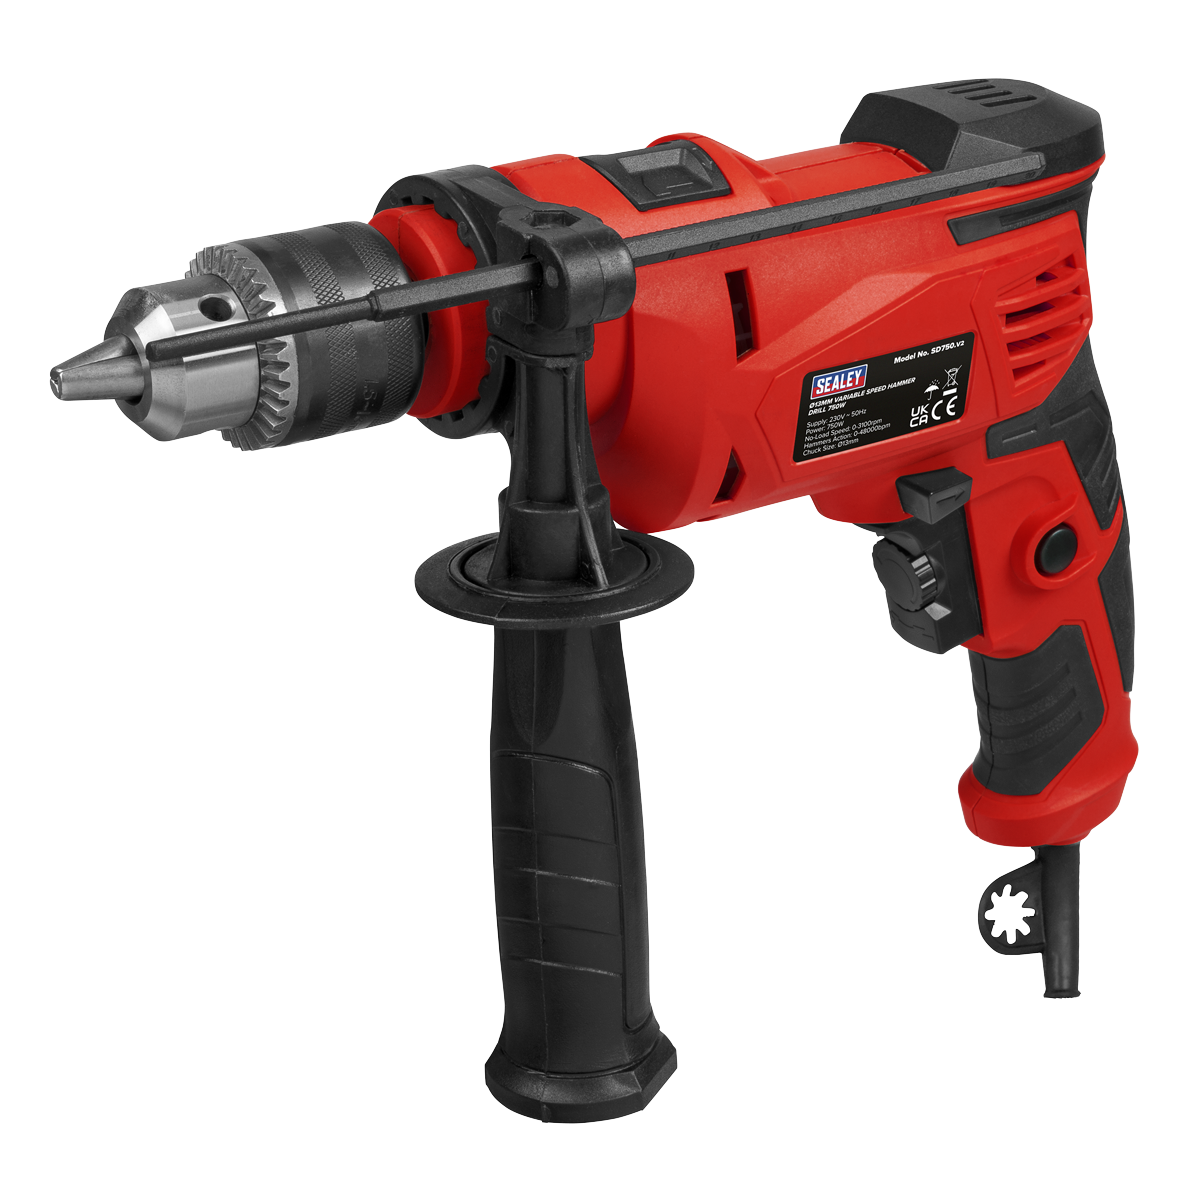 Sealey Hammer Drill Ø13mm Variable Speed with Reverse 750W/230V